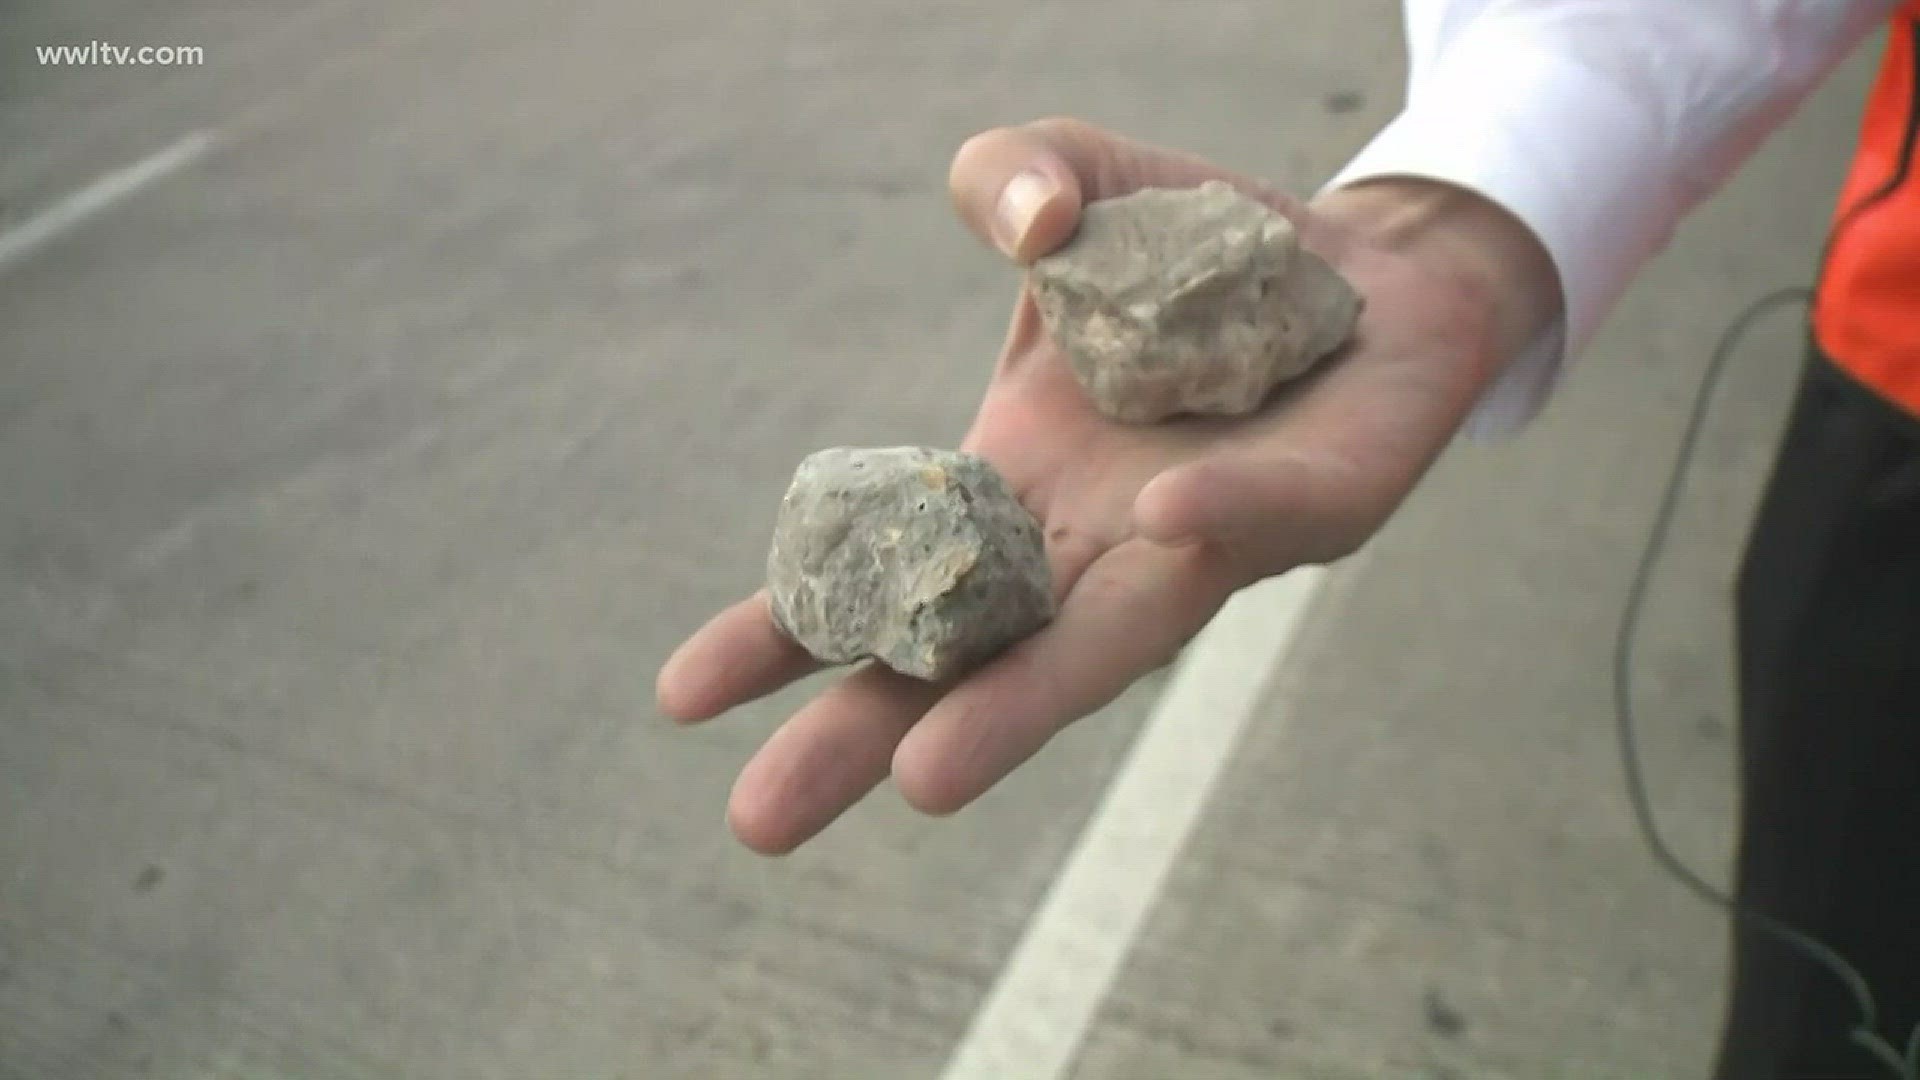 A load of rocks spilled onto the interstate westbound in Metairie Wednesday, causing traffic backups.